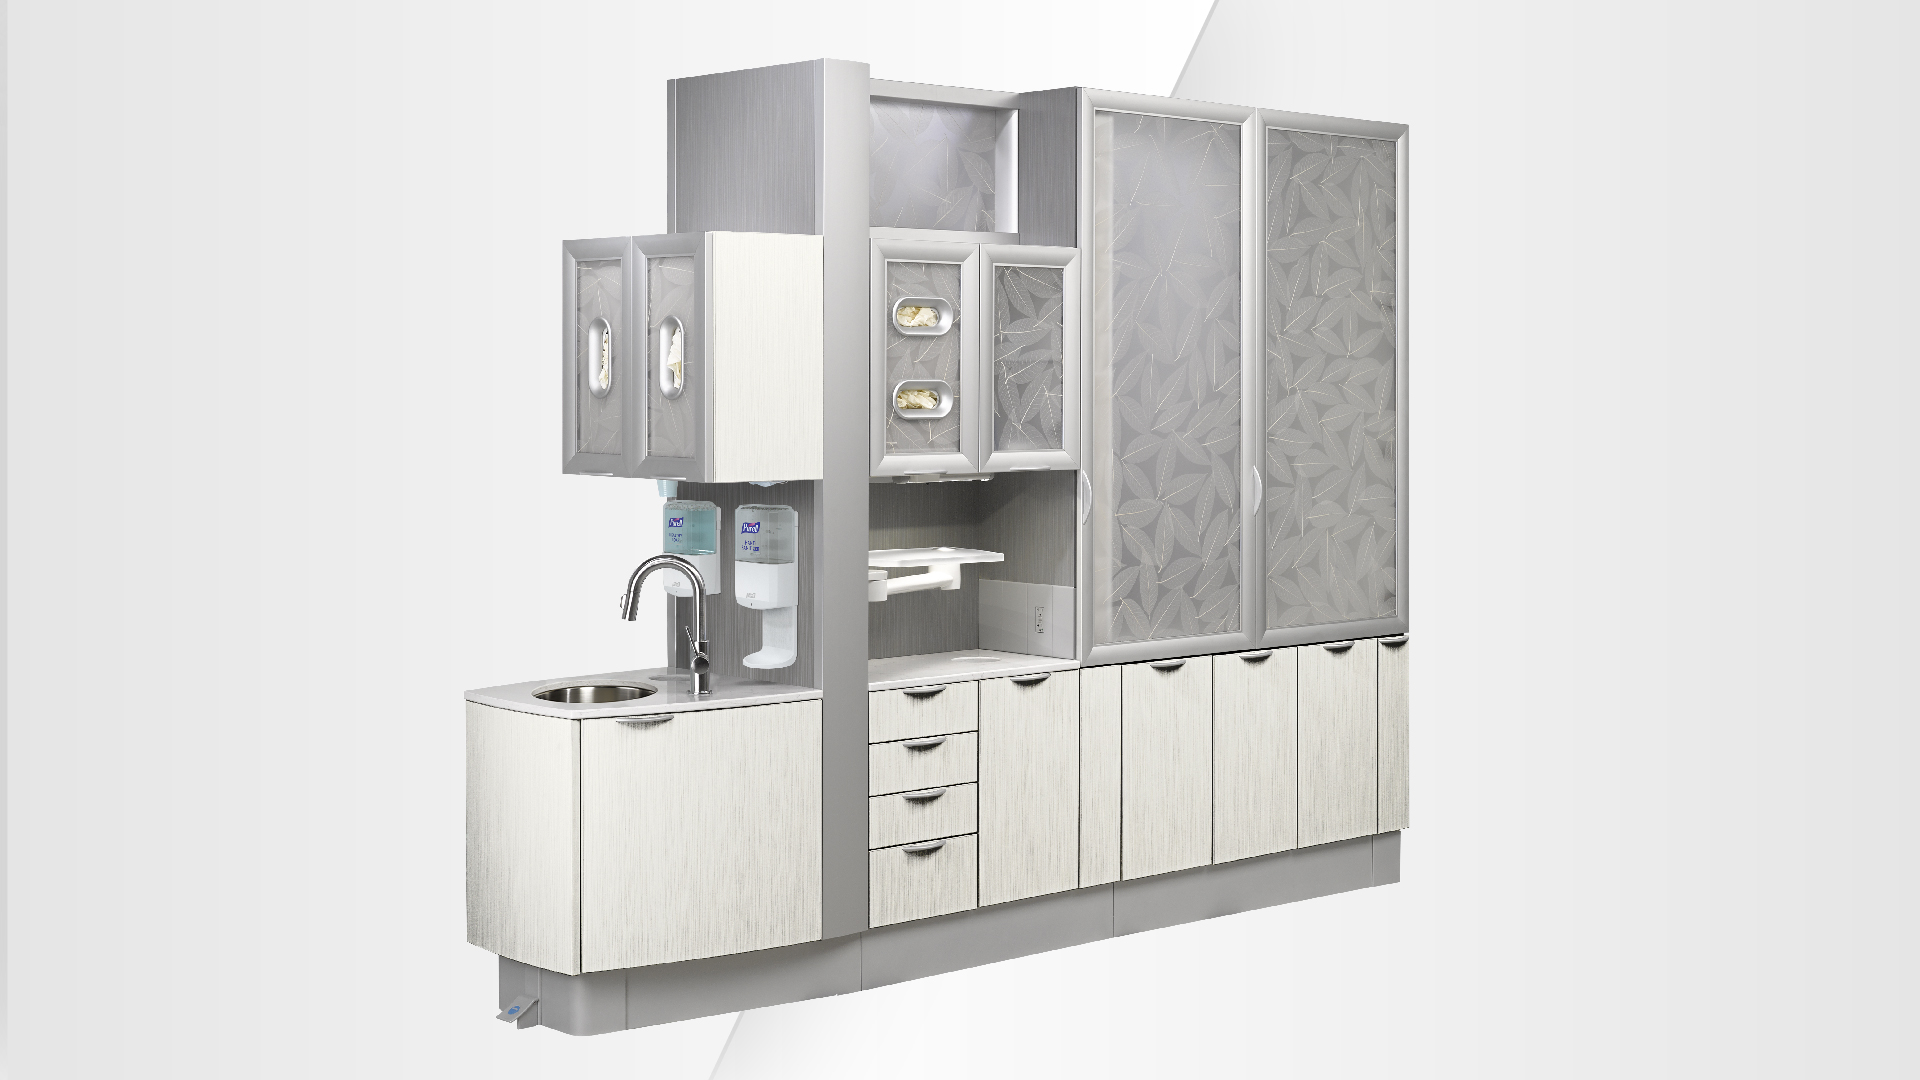 A Dec Dental Cabinets Compare Features